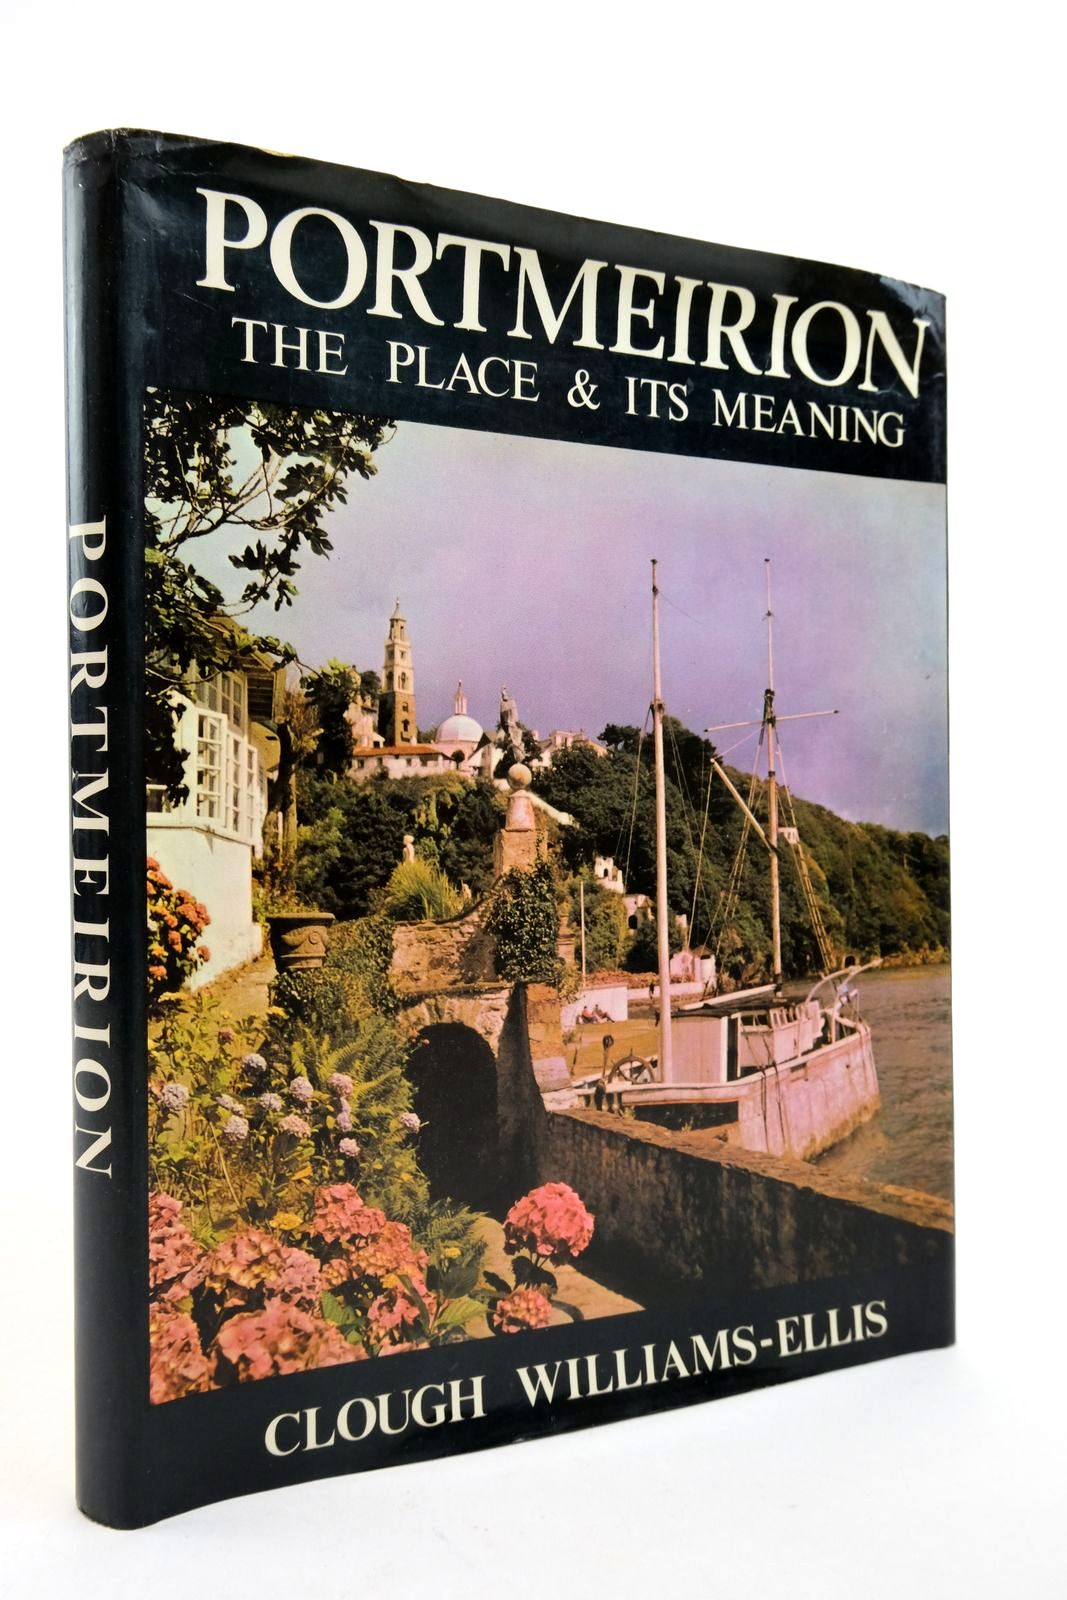 Photo of PORTMEIRION: THE PLACE AND ITS MEANING written by Williams-Ellis, Clough published by Portmeirion Limited (STOCK CODE: 2140729)  for sale by Stella & Rose's Books